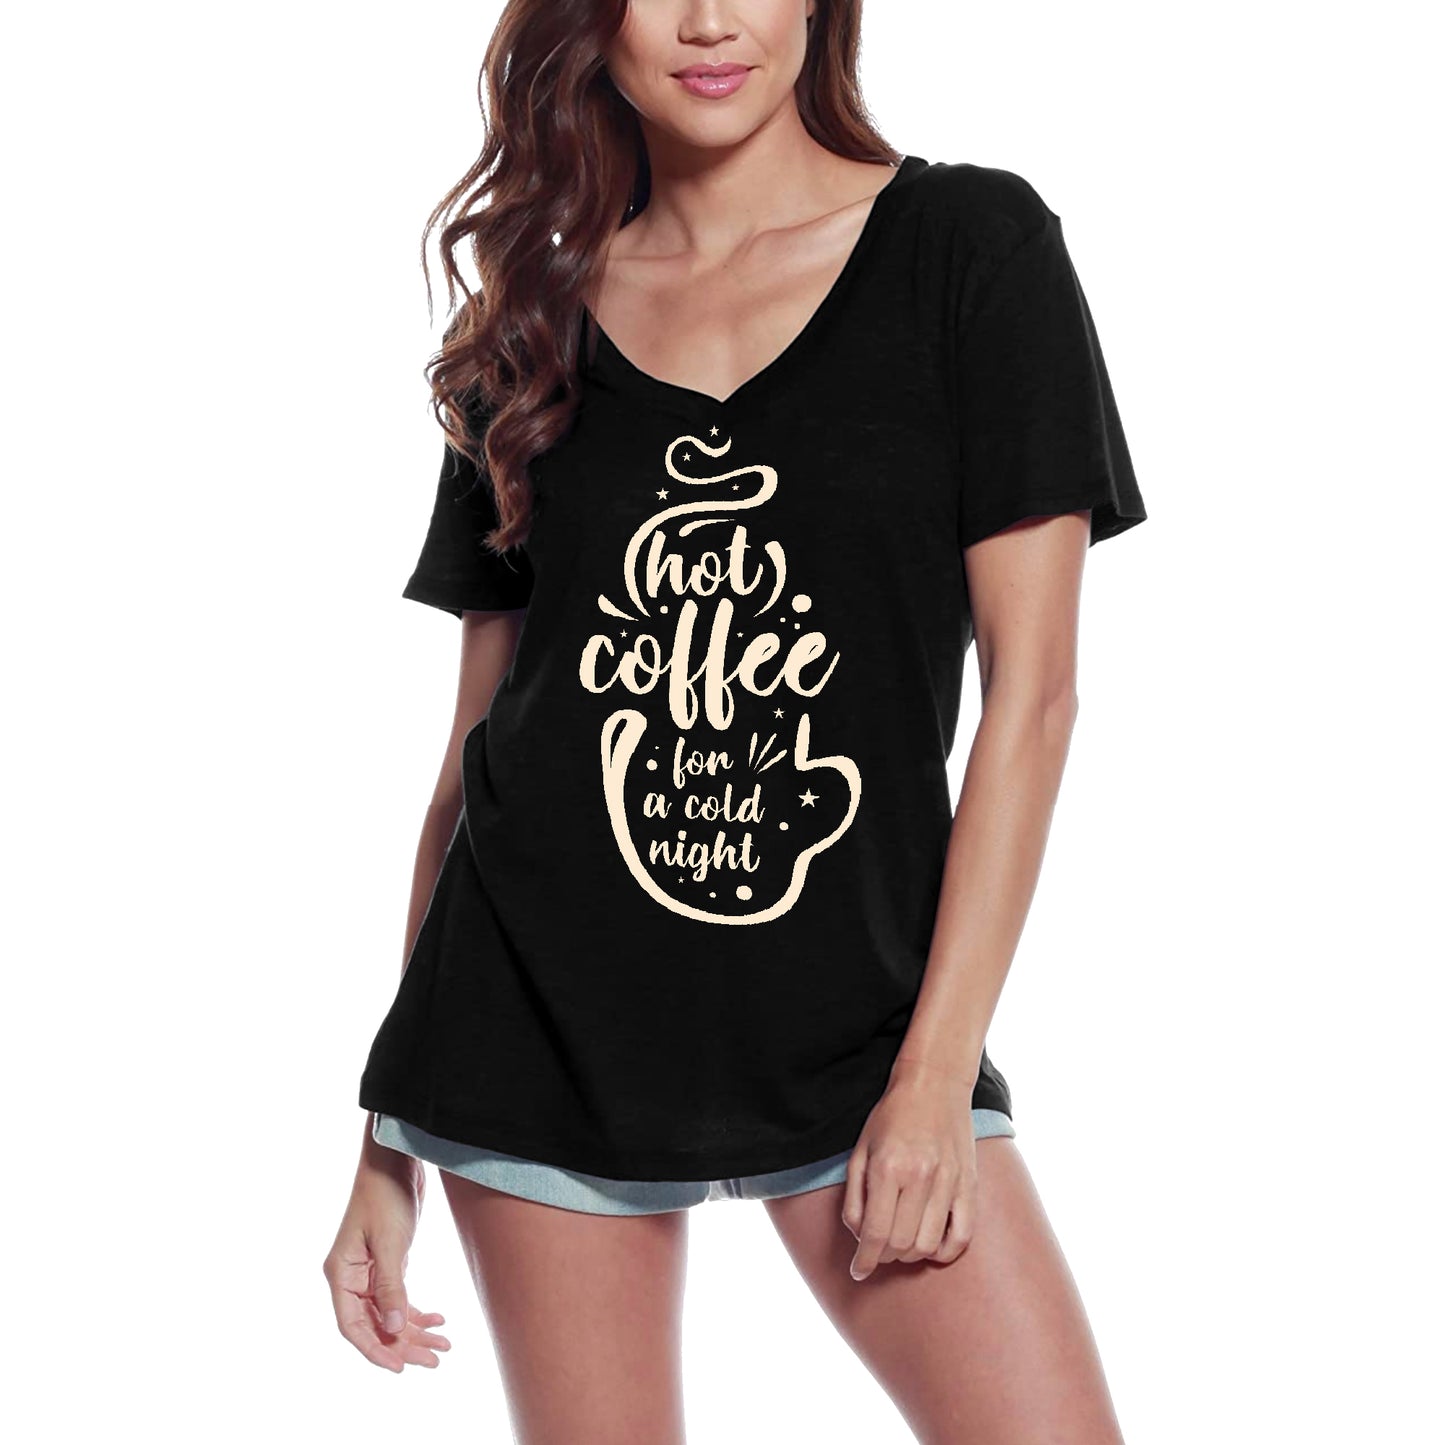 ULTRABASIC Women's T-Shirt Hot Coffee For a Cold Night - First Coffee - Vintage